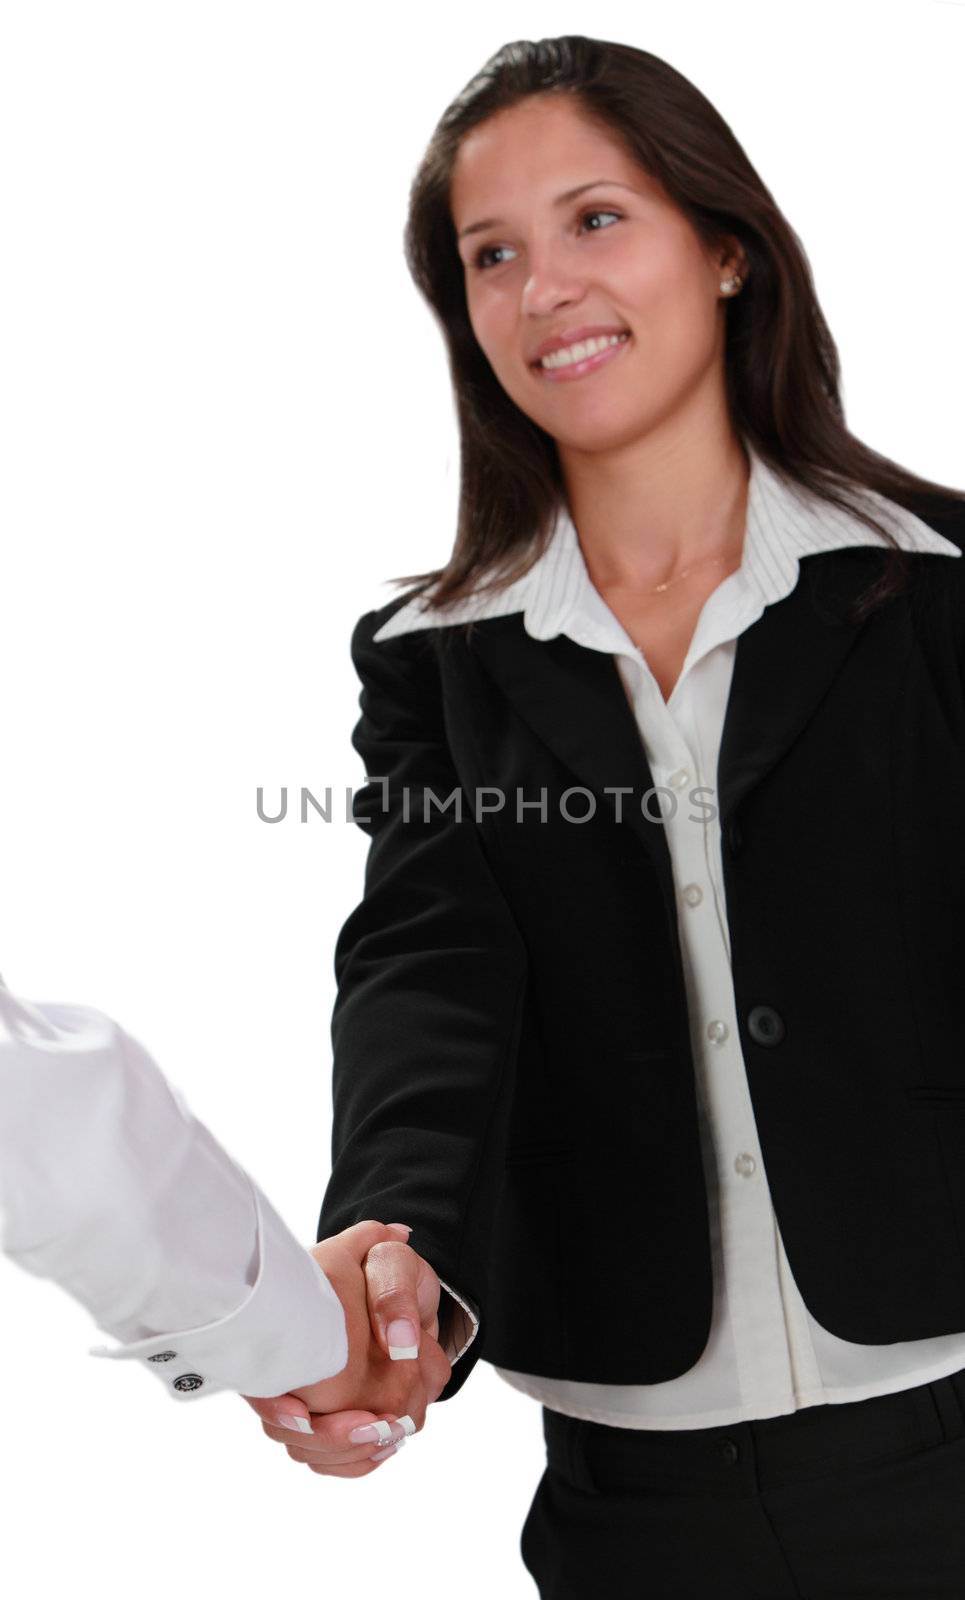 Two businesswoman shaking hands isolated against a white background.Selective focus on the hands.The woman in black suit is not in focus.